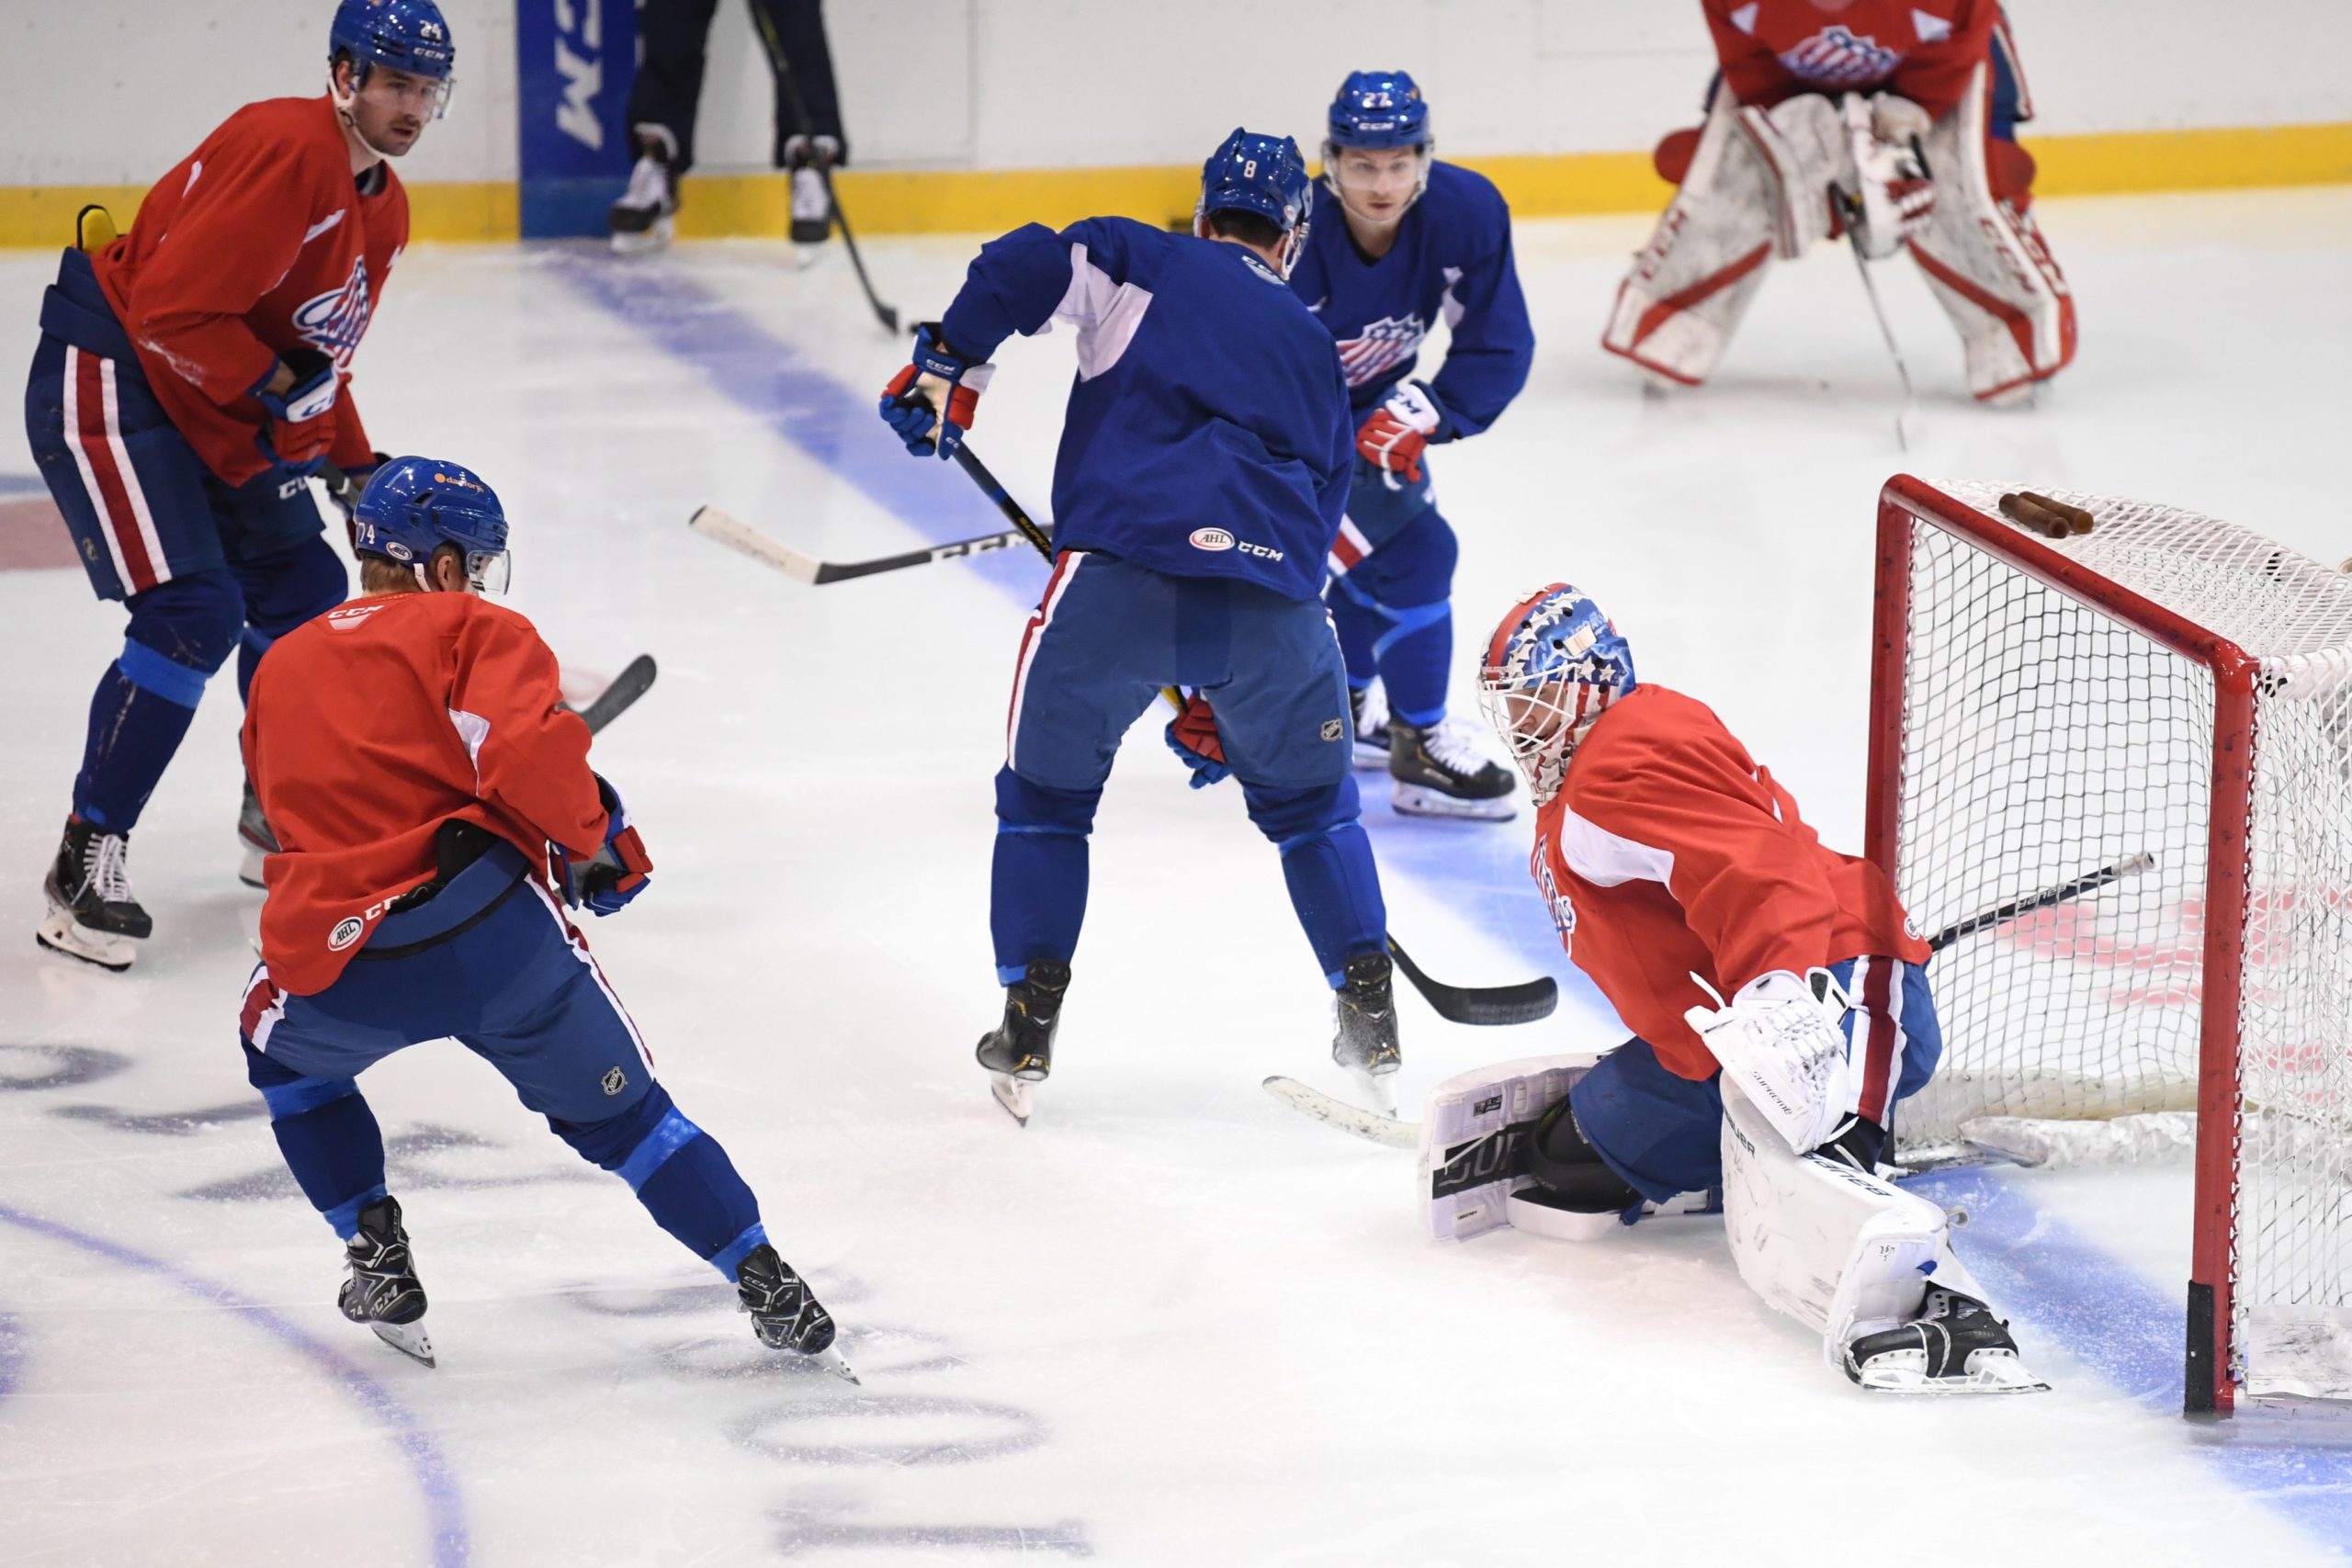 Amerks season preview: “We want to be miserable to play against”